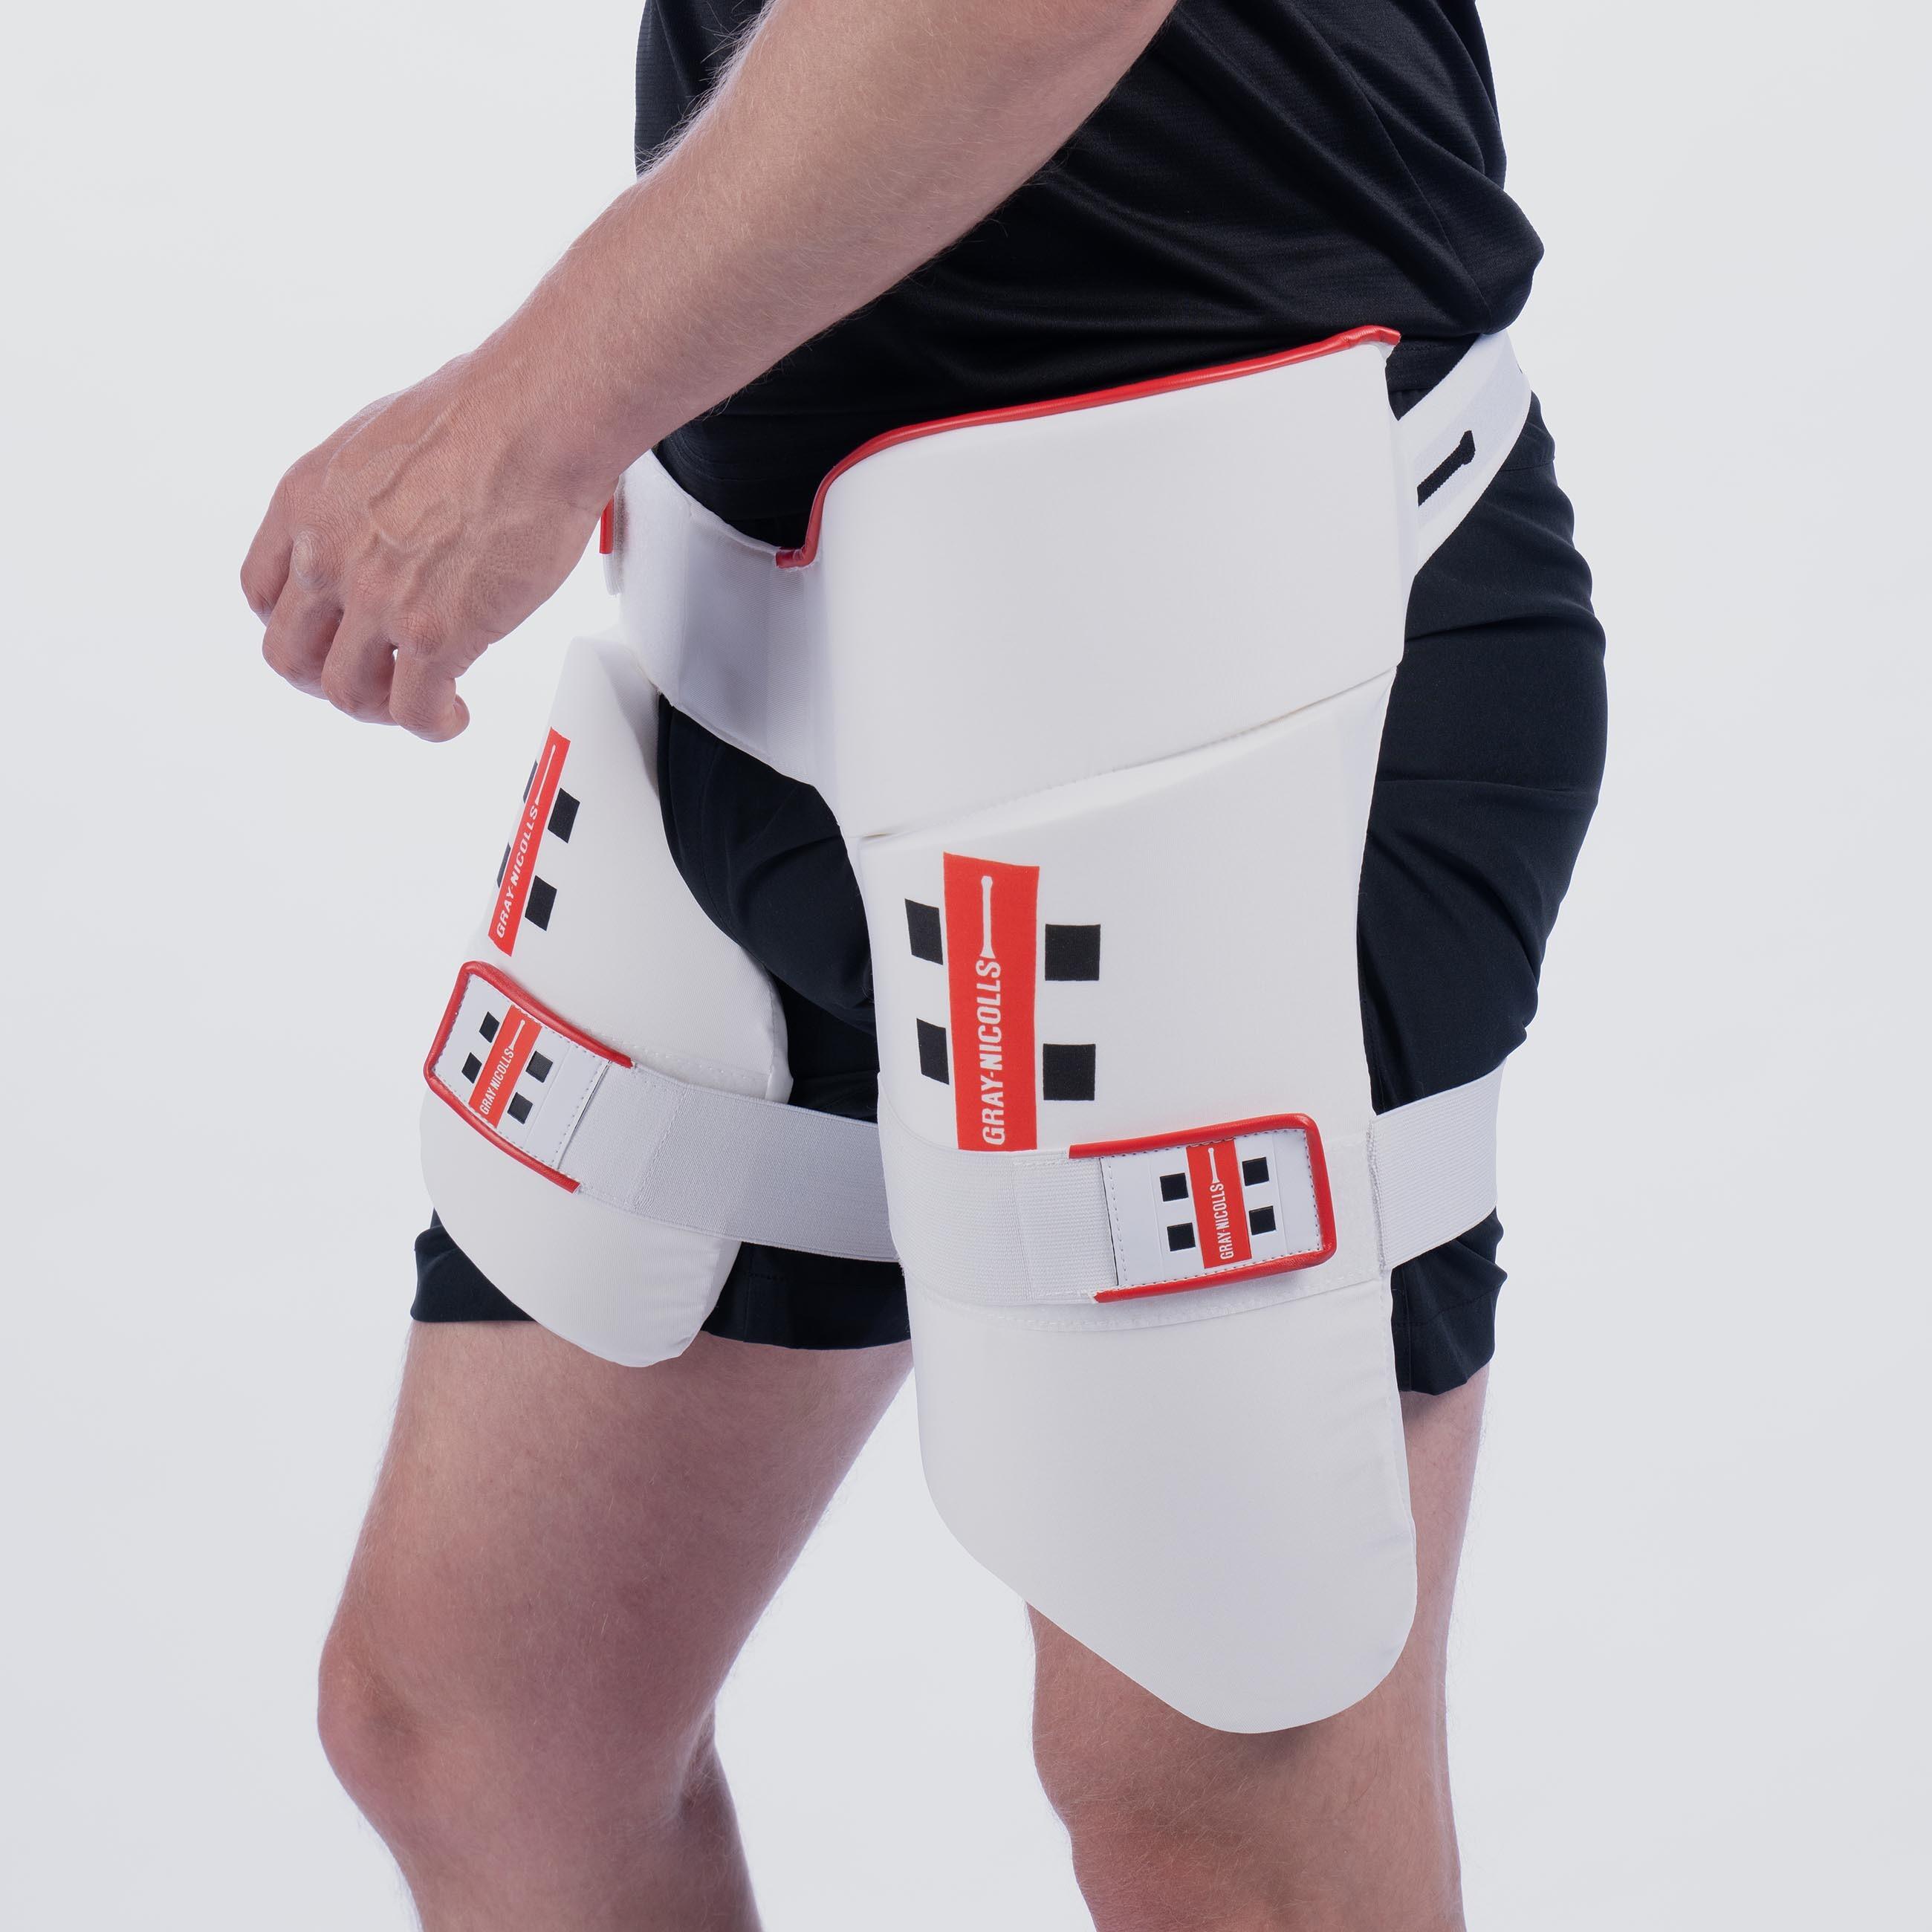 GRAY-NICOLLS All In One 360 Thigh Pads, White, LH